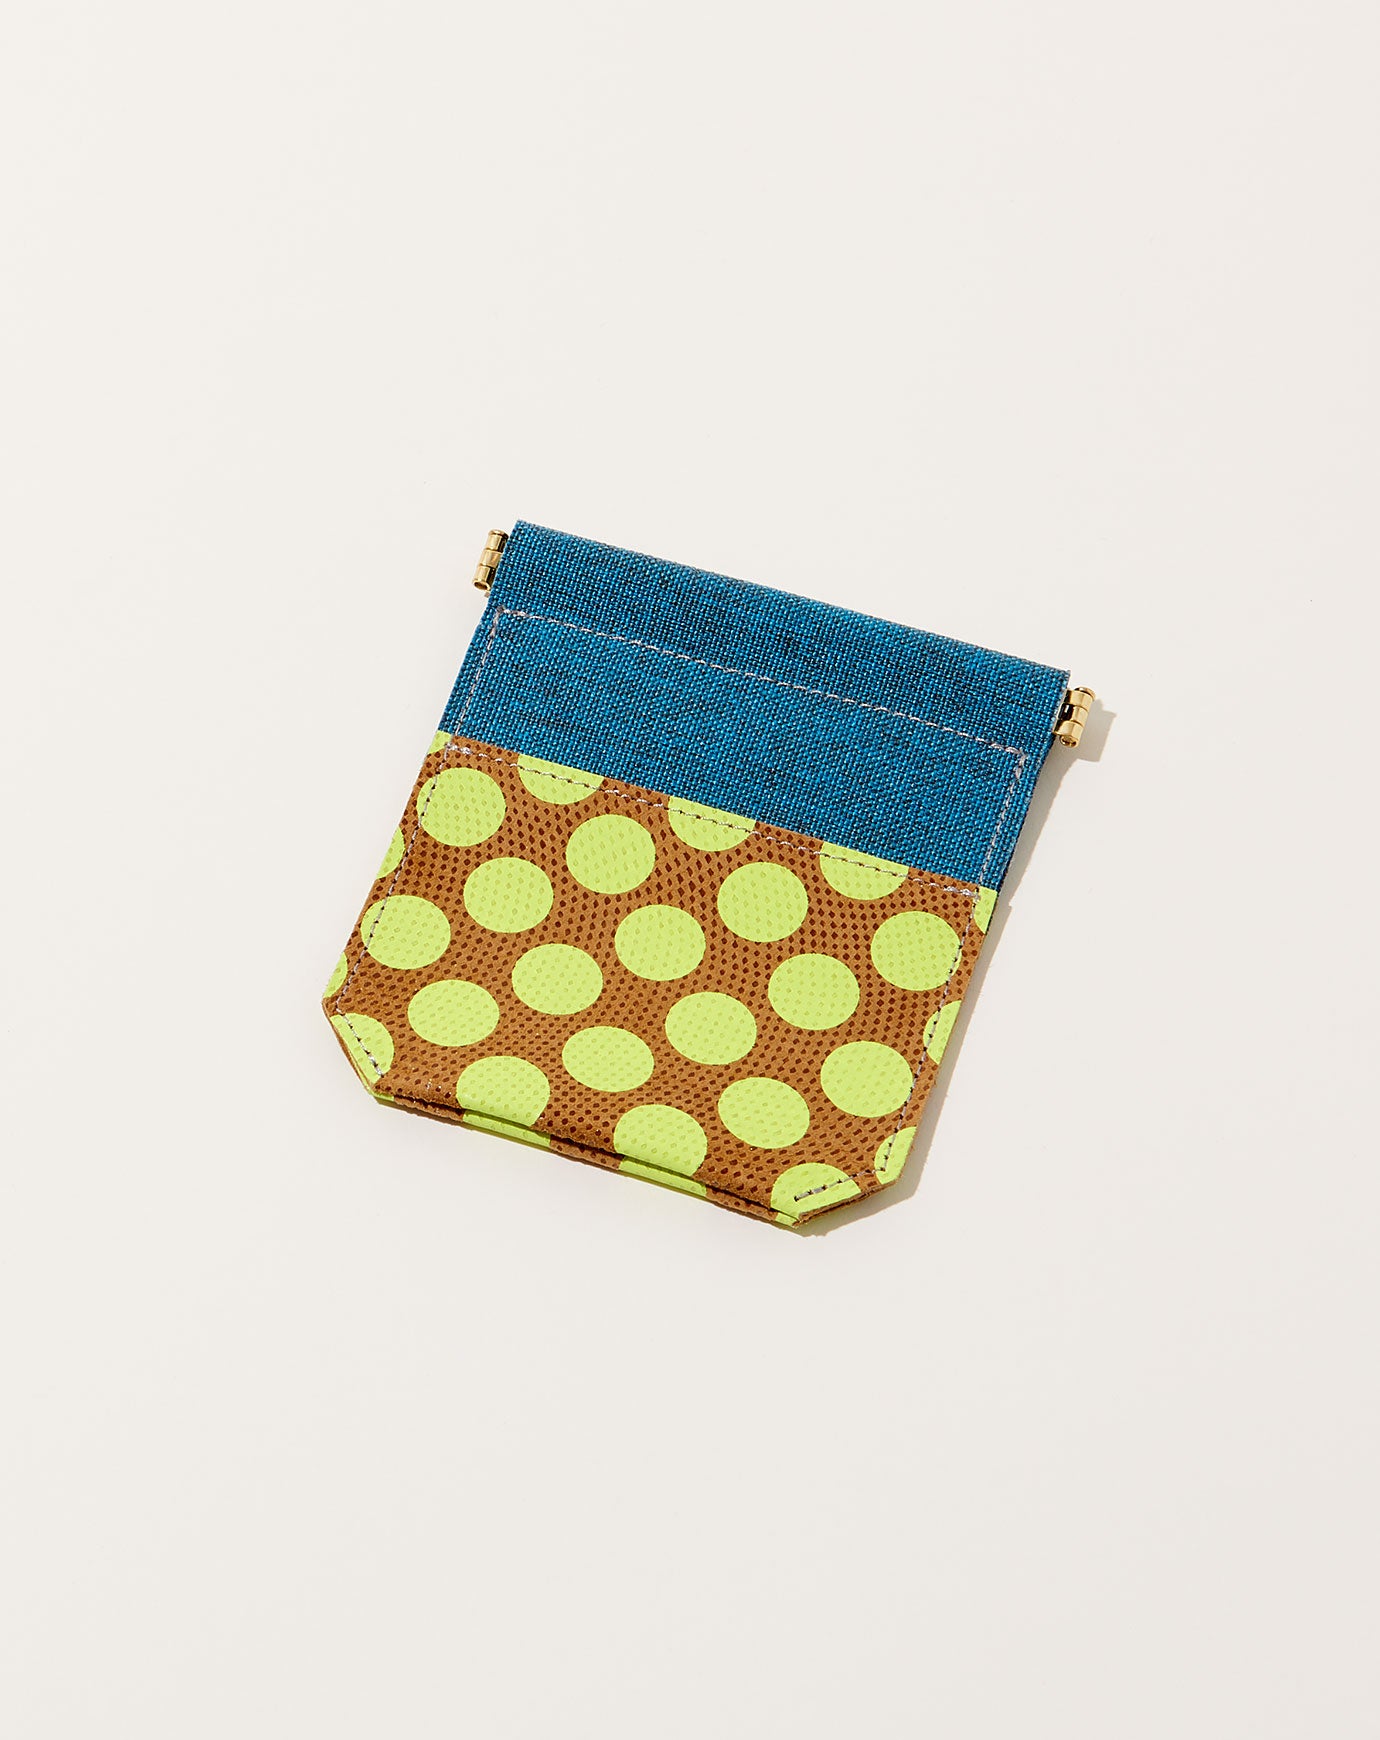 Carmine Ecology Leather Mini Pouch in Neon Yellow